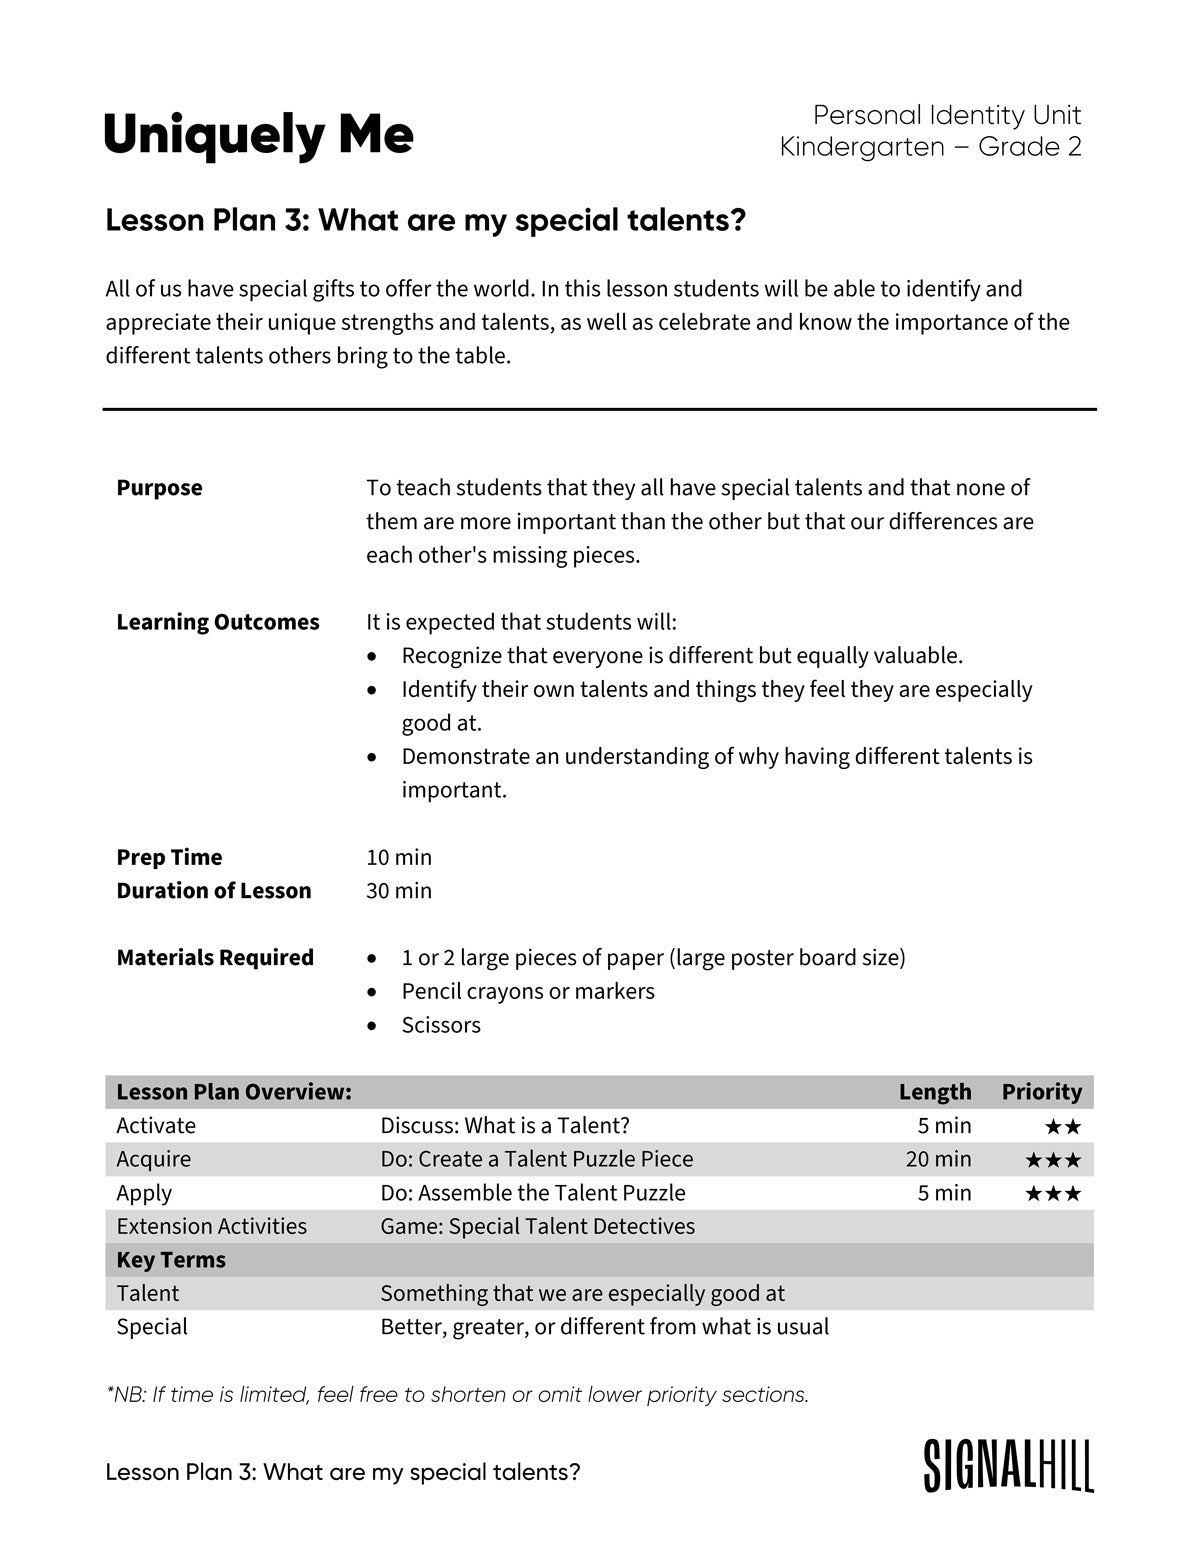 Lesson Plan 3: What Are My Special Talents?